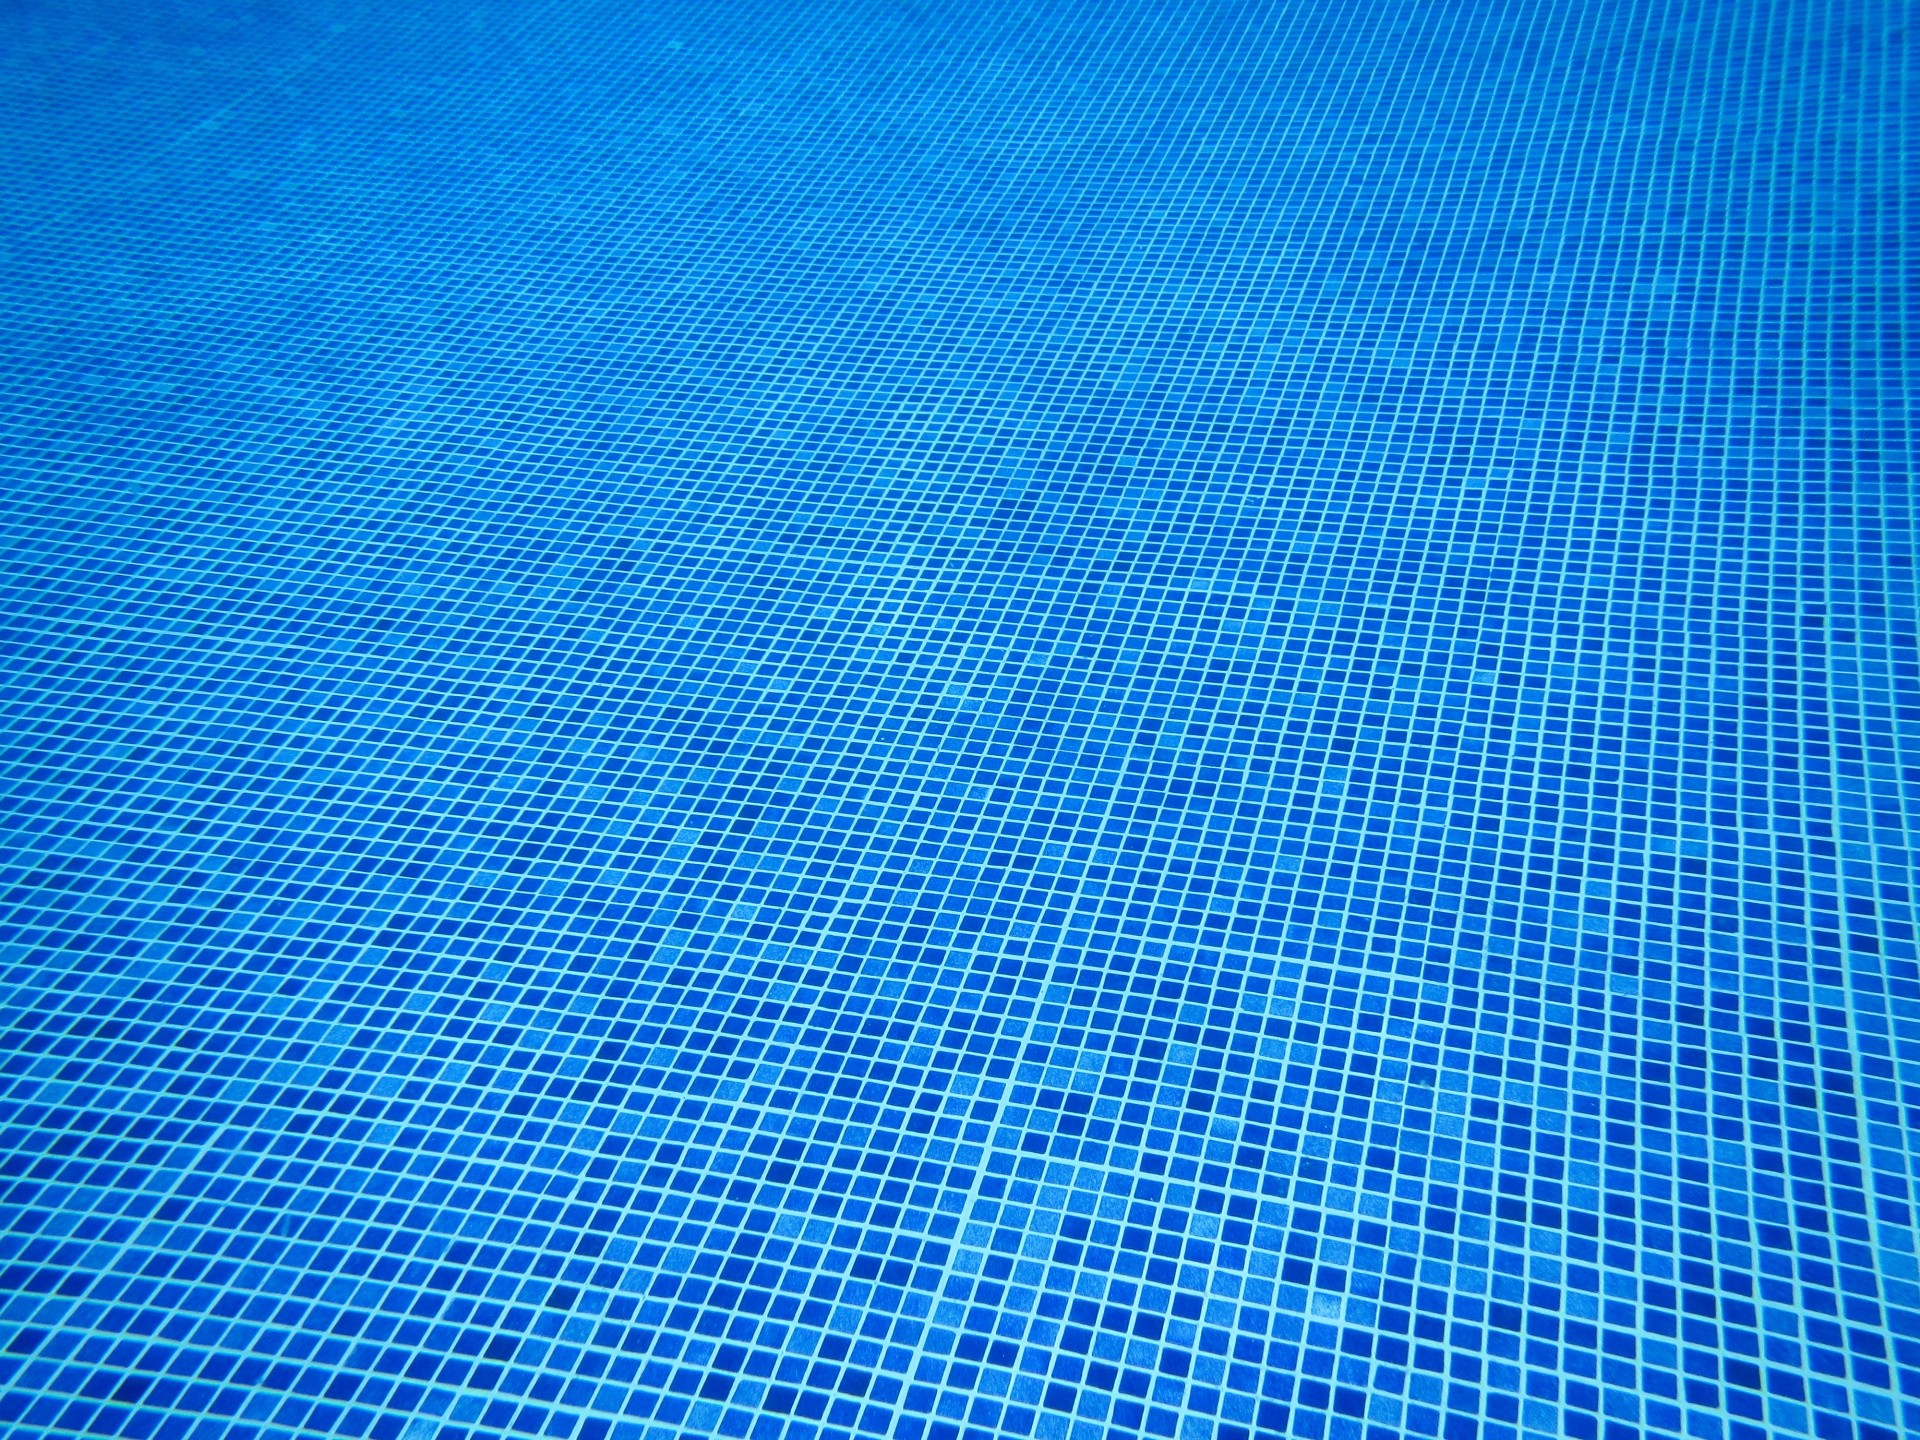 Water Background Image (65+ pictures)